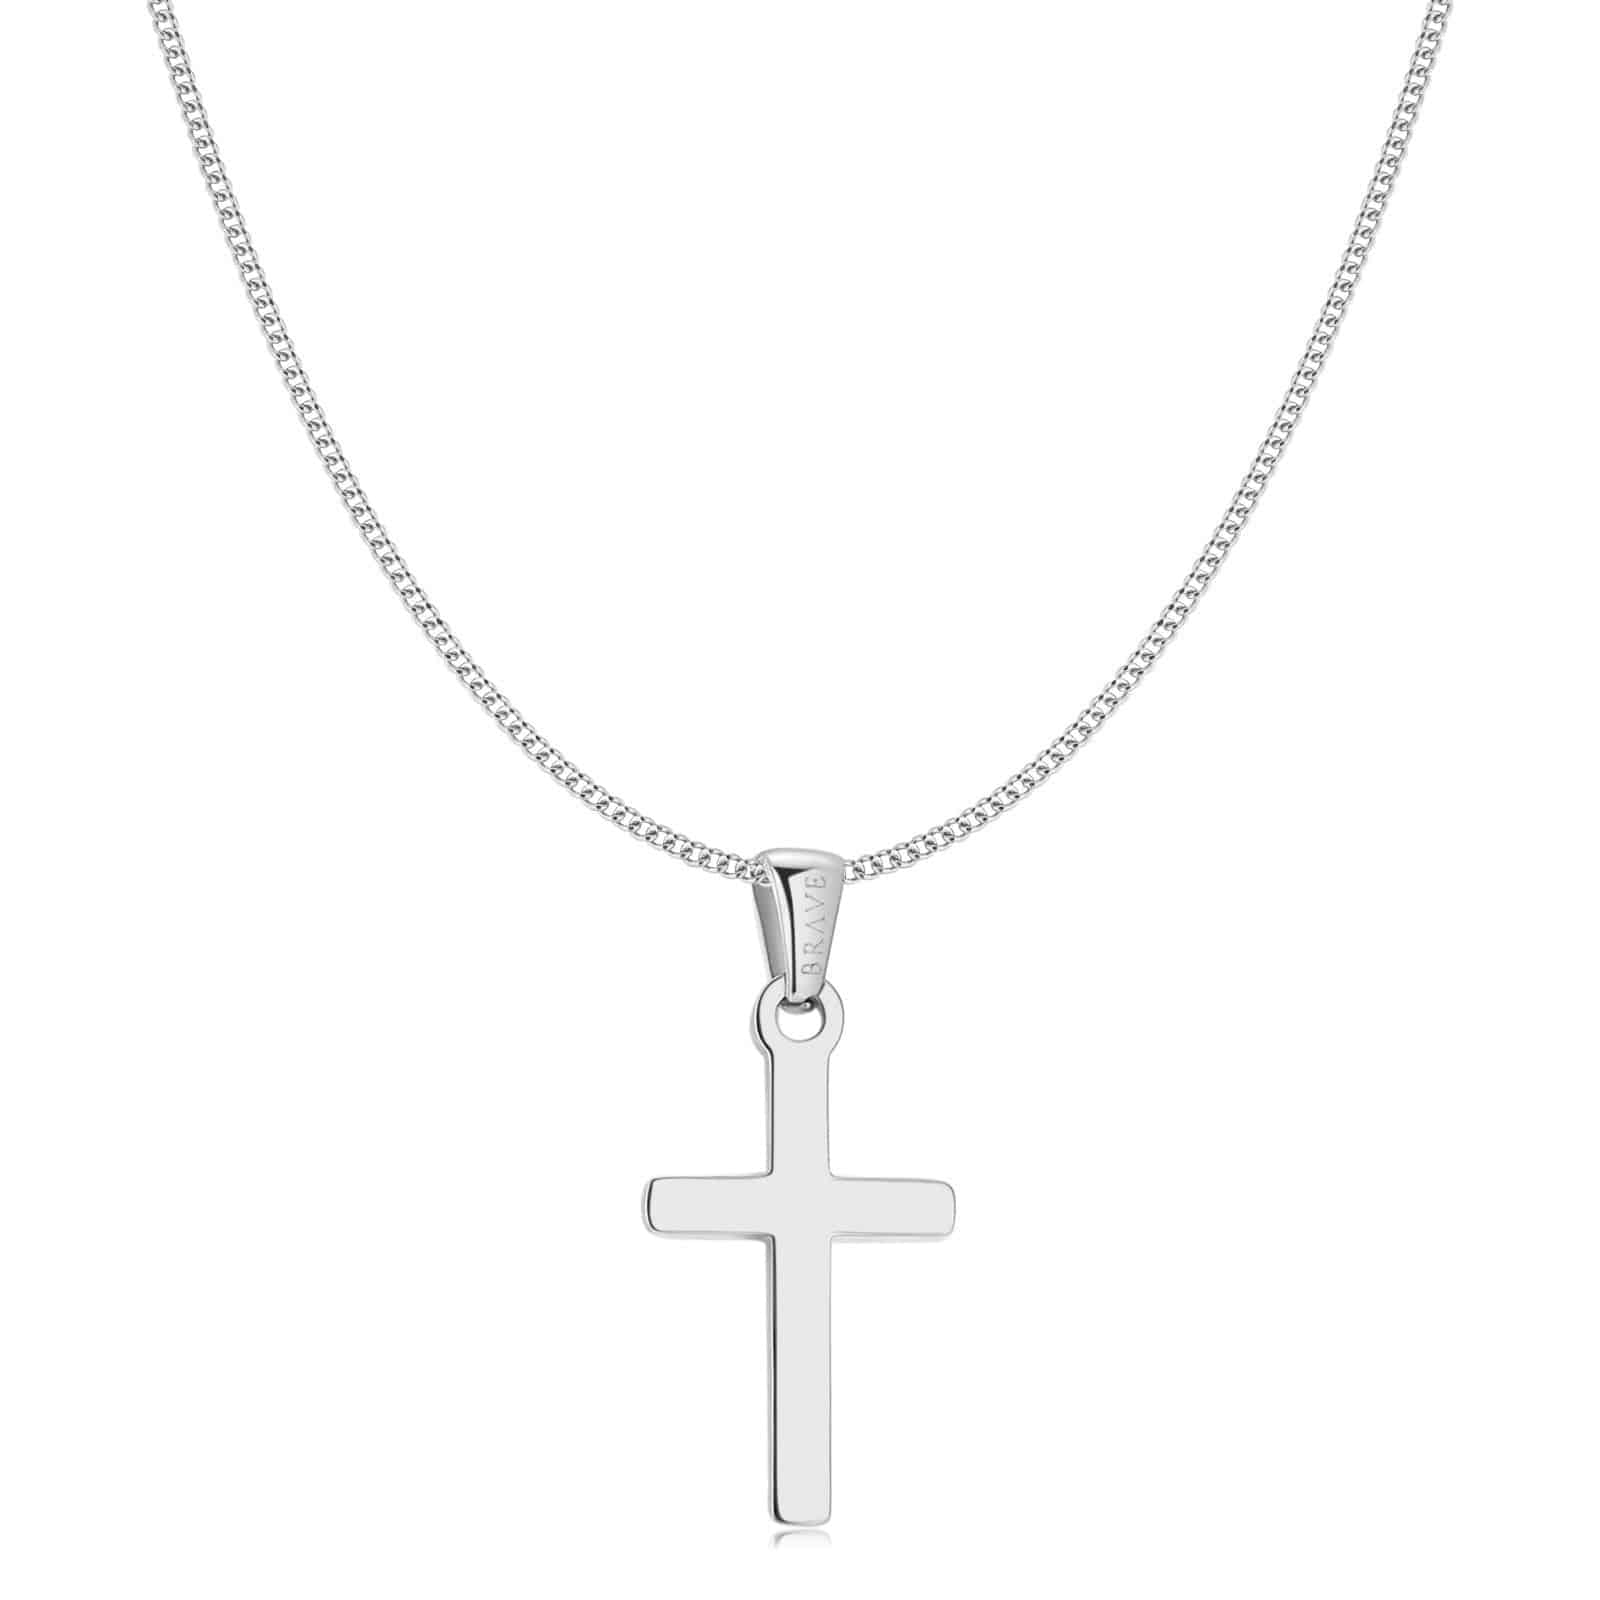 Men's Snake Wrapped Around Cross Necklace